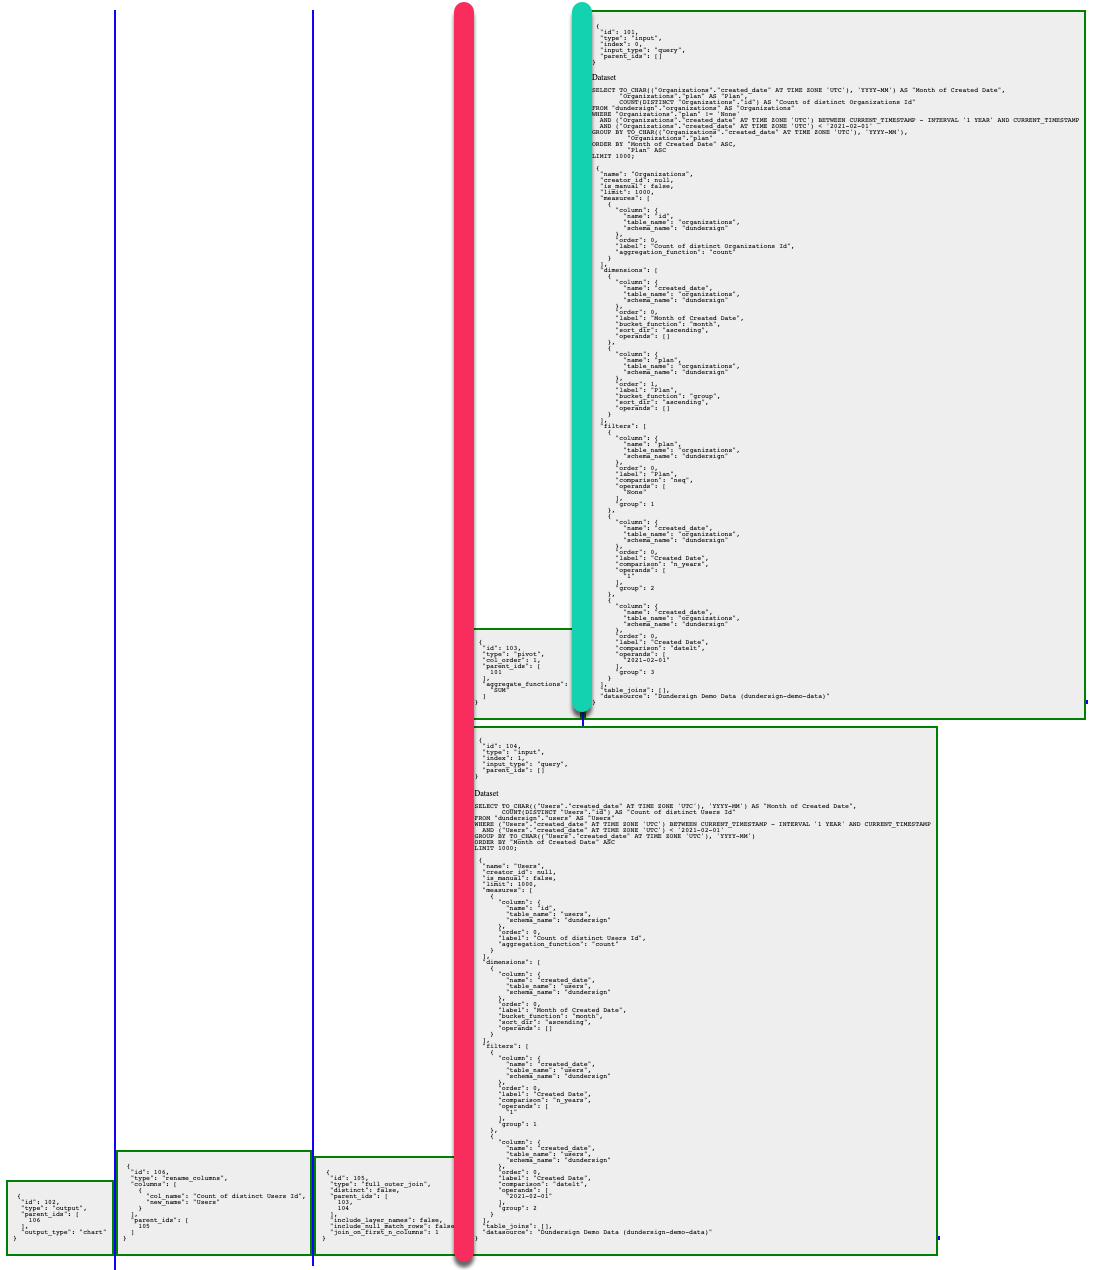 Two vertical paths highlighted in the Pipeline data